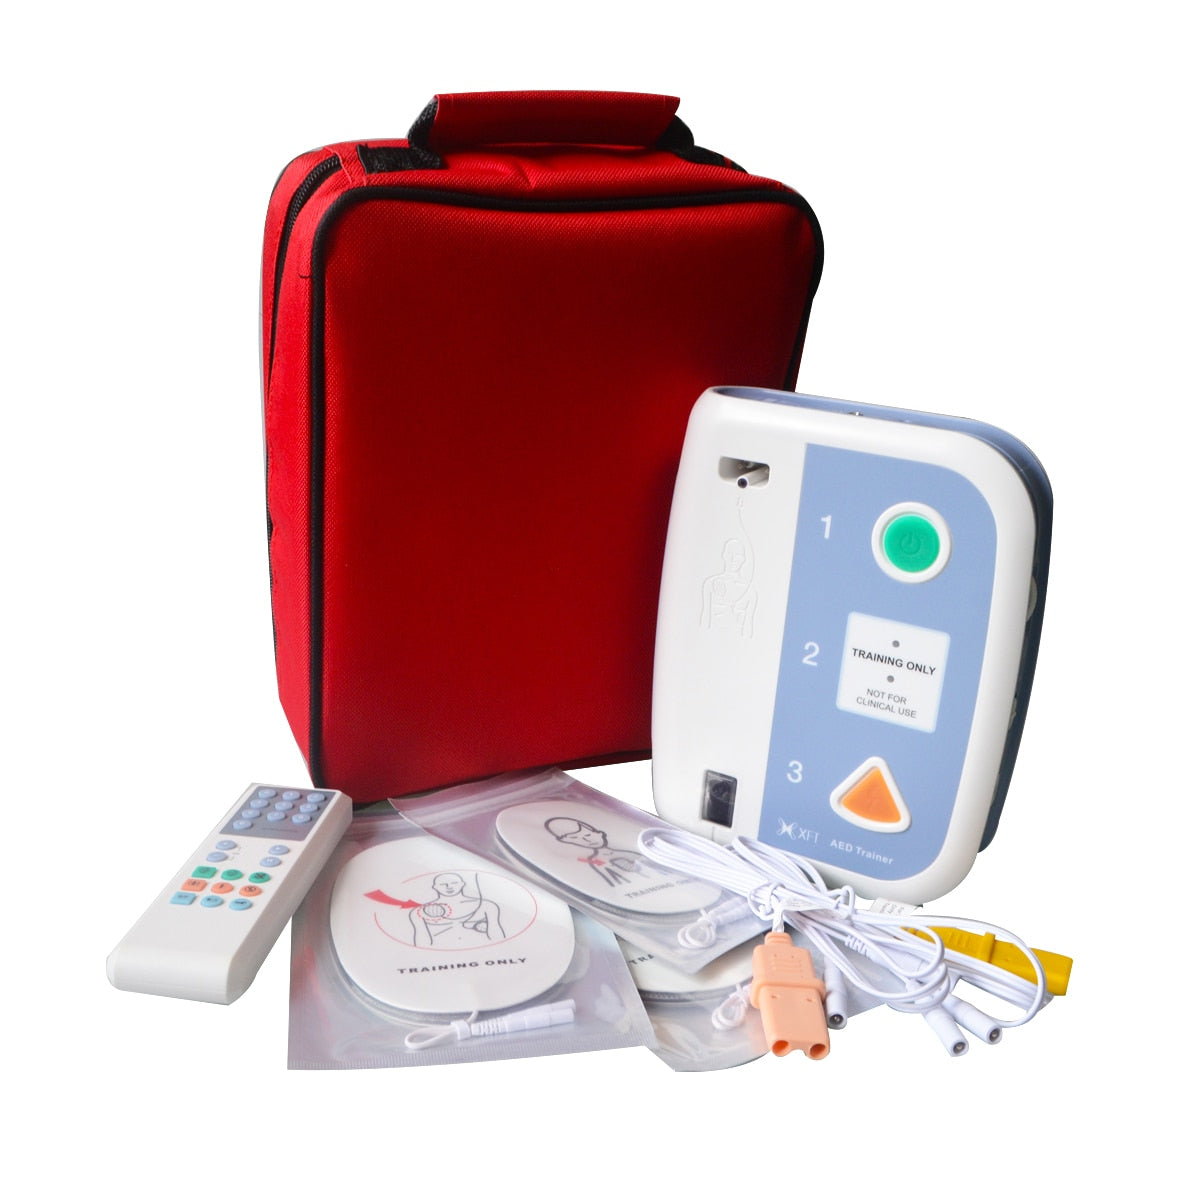 XFT-120C+ First Aid Device AED Trainer Automated External Defibrillator Emergency CPR Training Teaching Several Language Choose